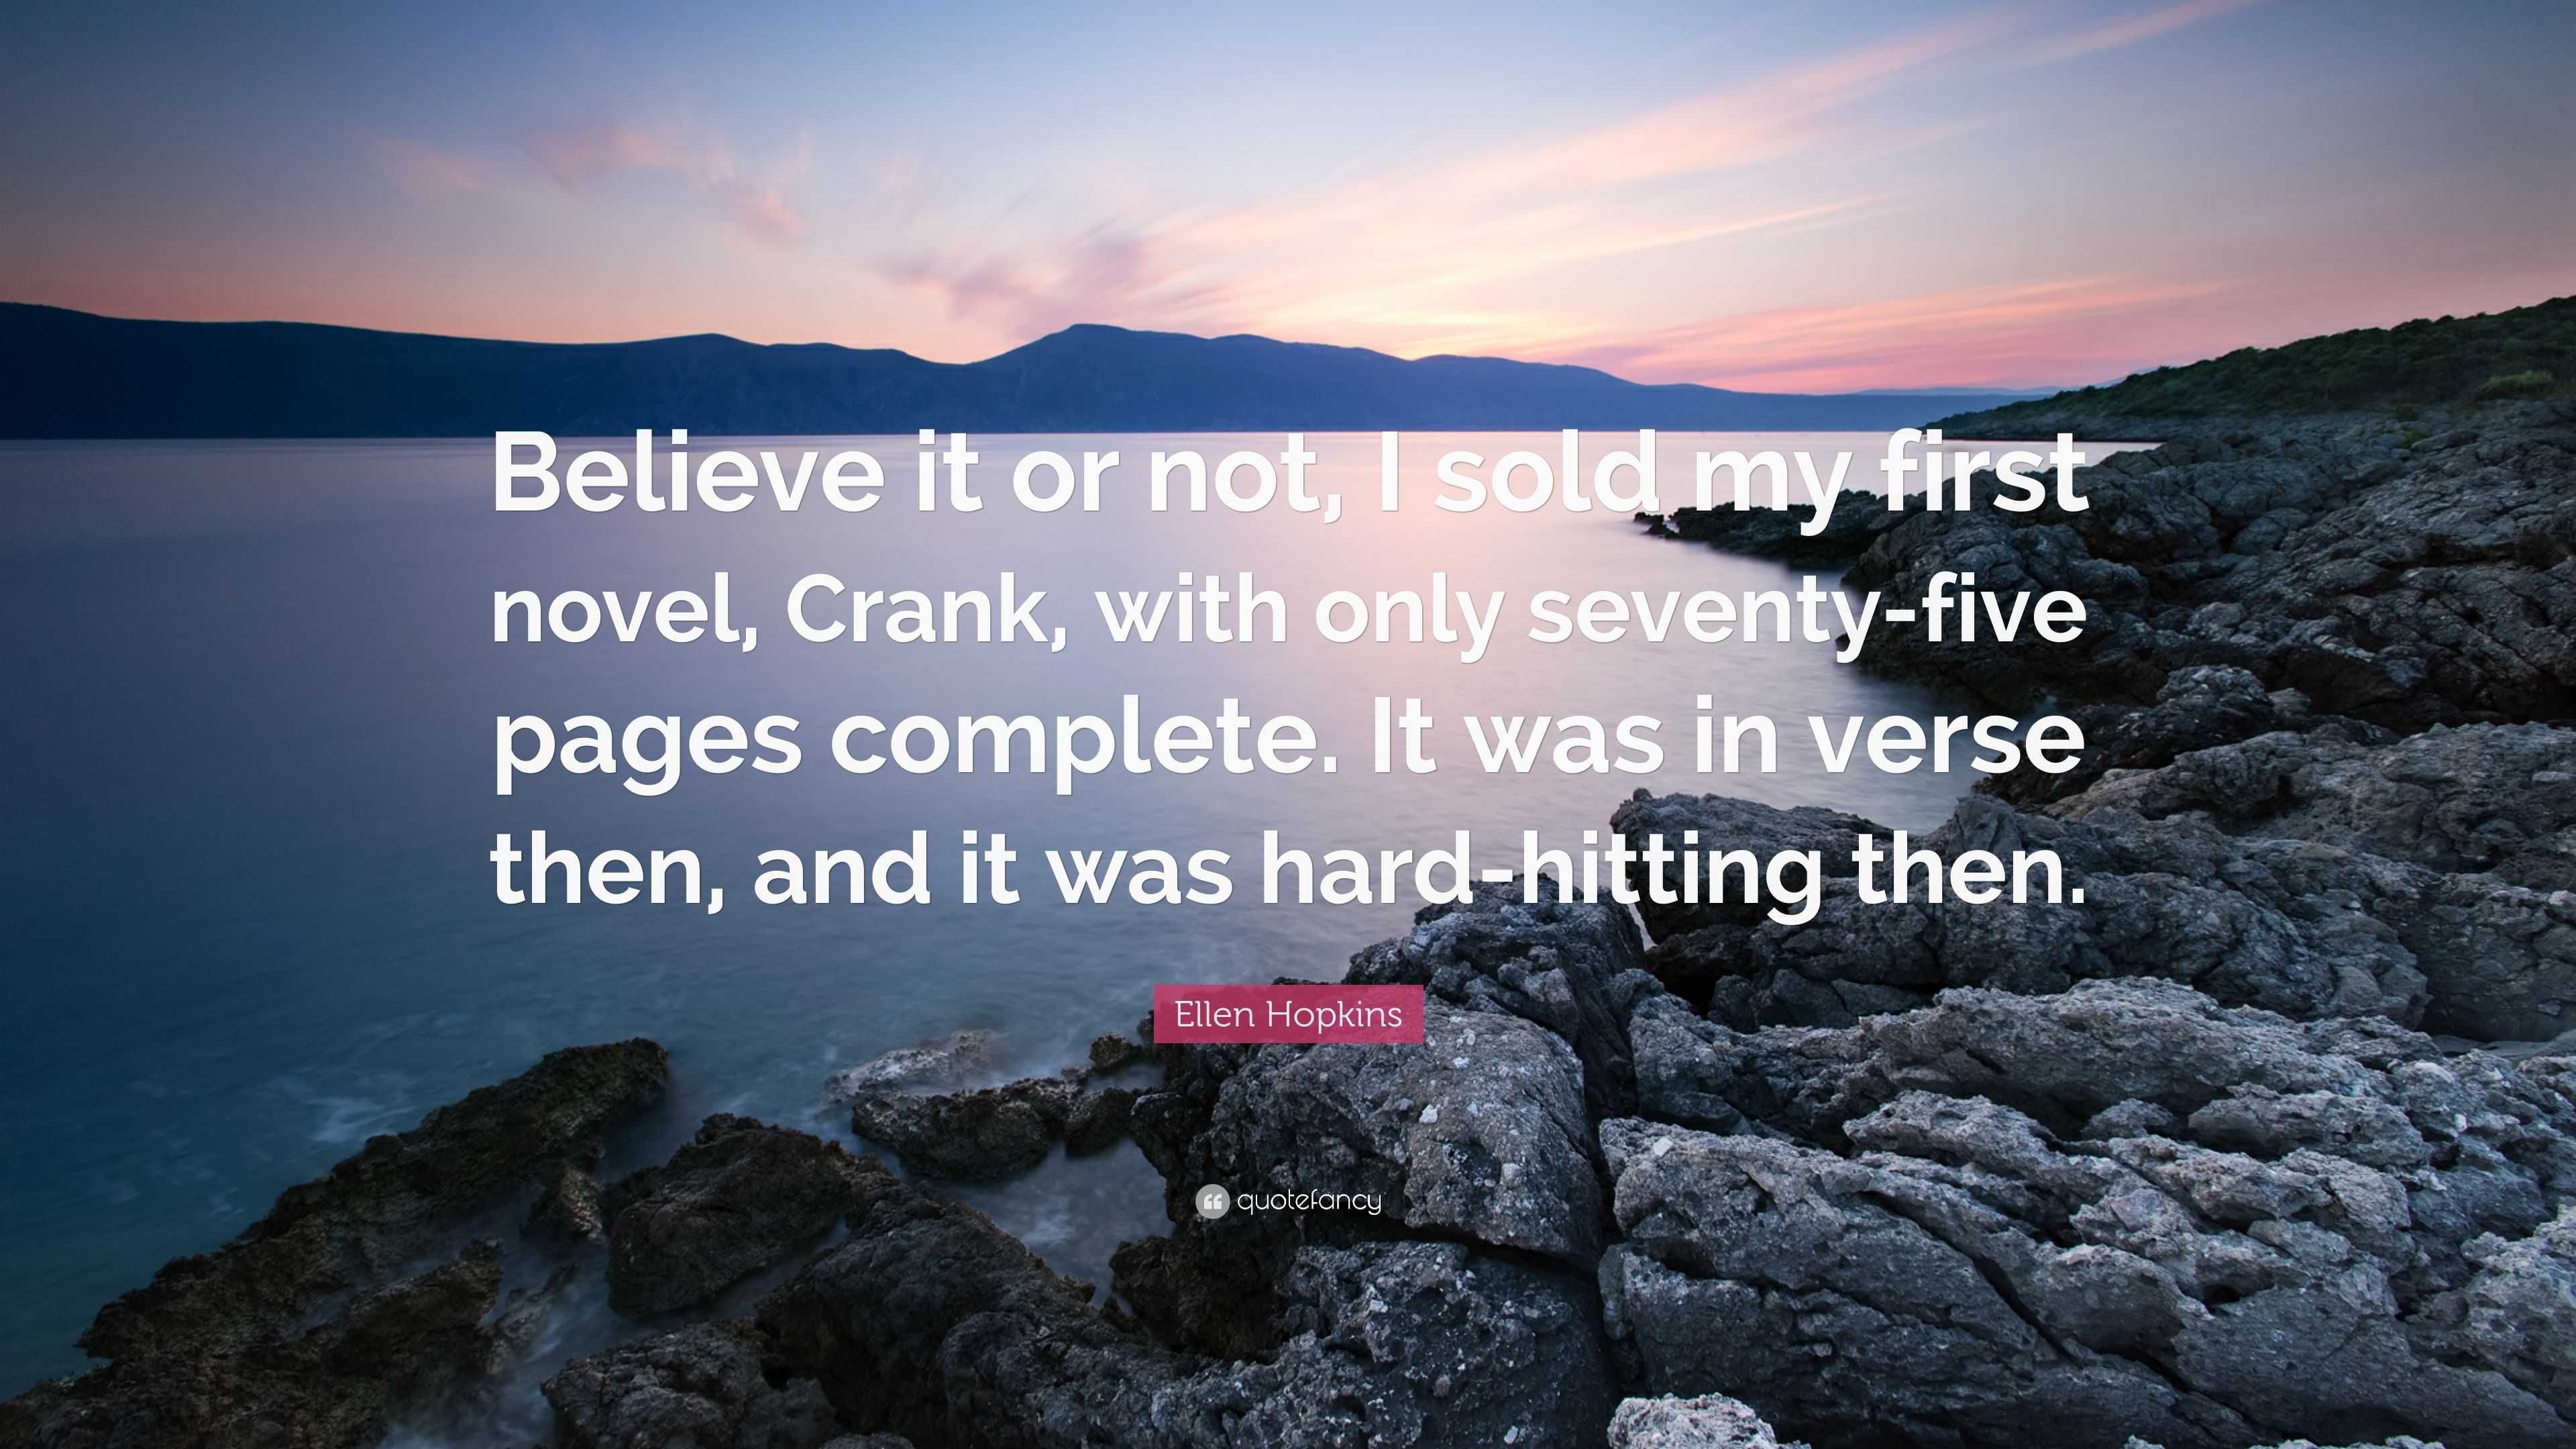 Ellen Hopkins Quote: “You believe this is a game, and you may be